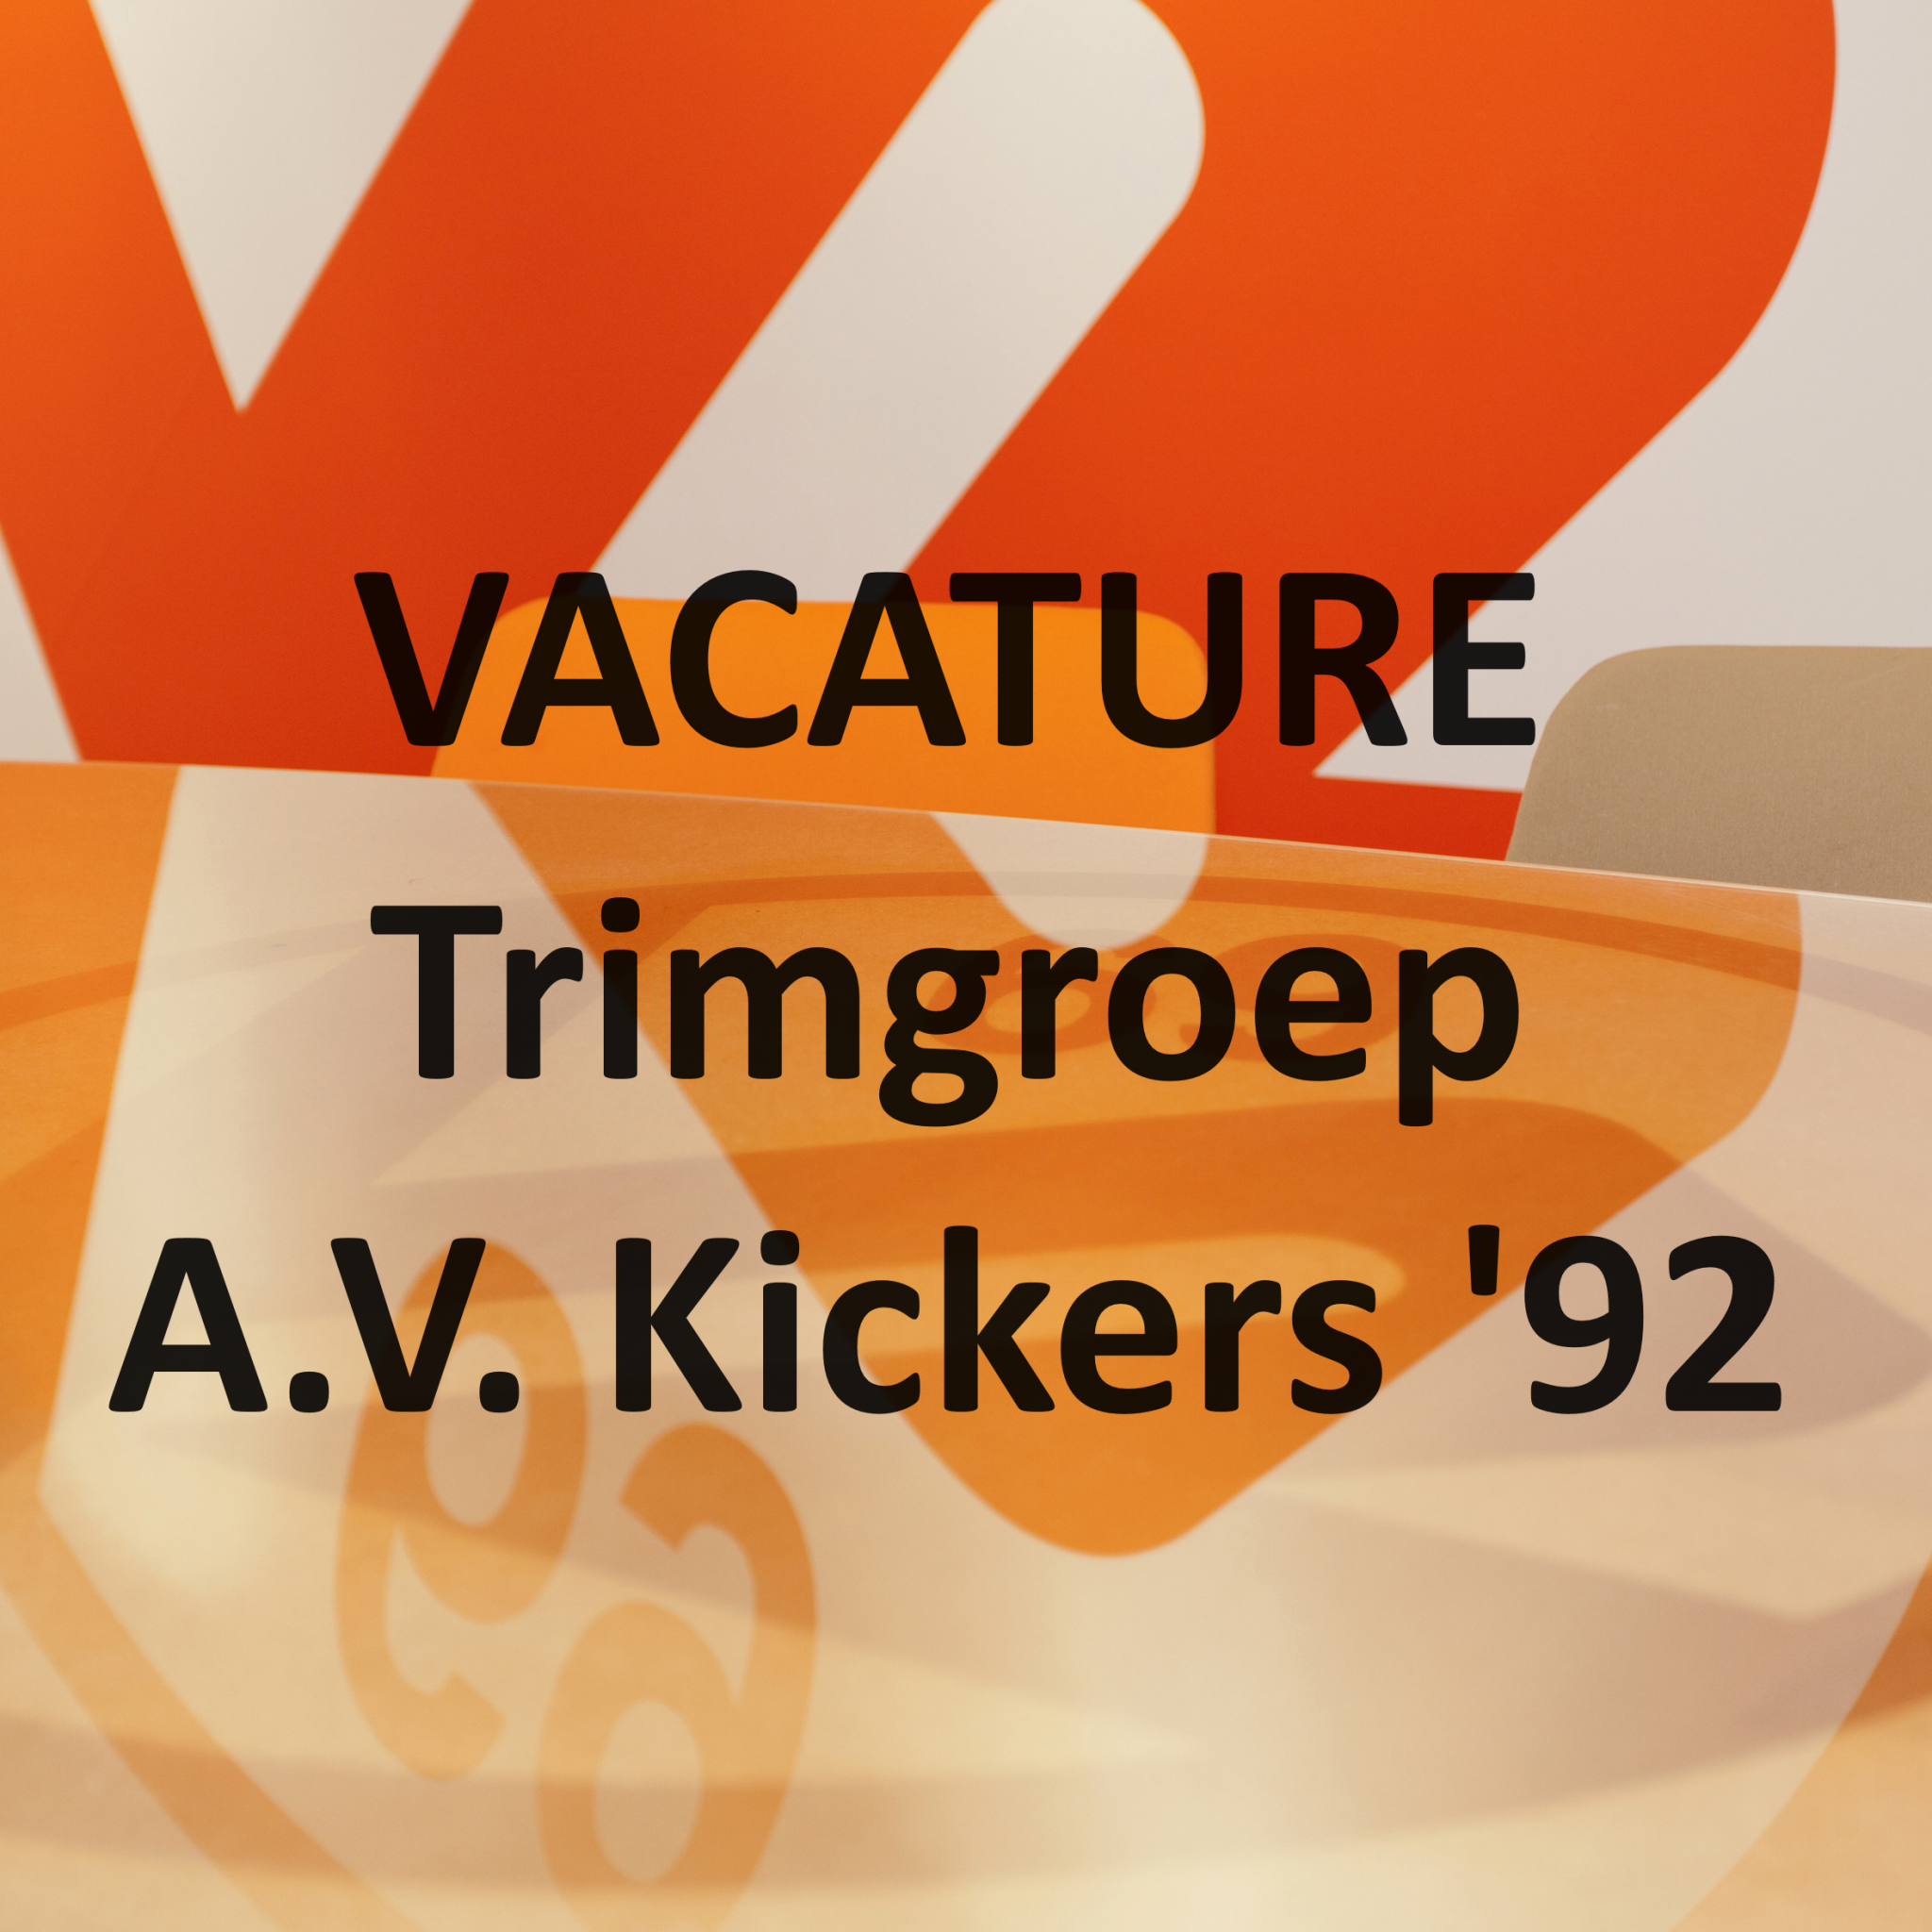 A.V. Kickers ’92 zoekt trainer/instructrice dames Trimgroep